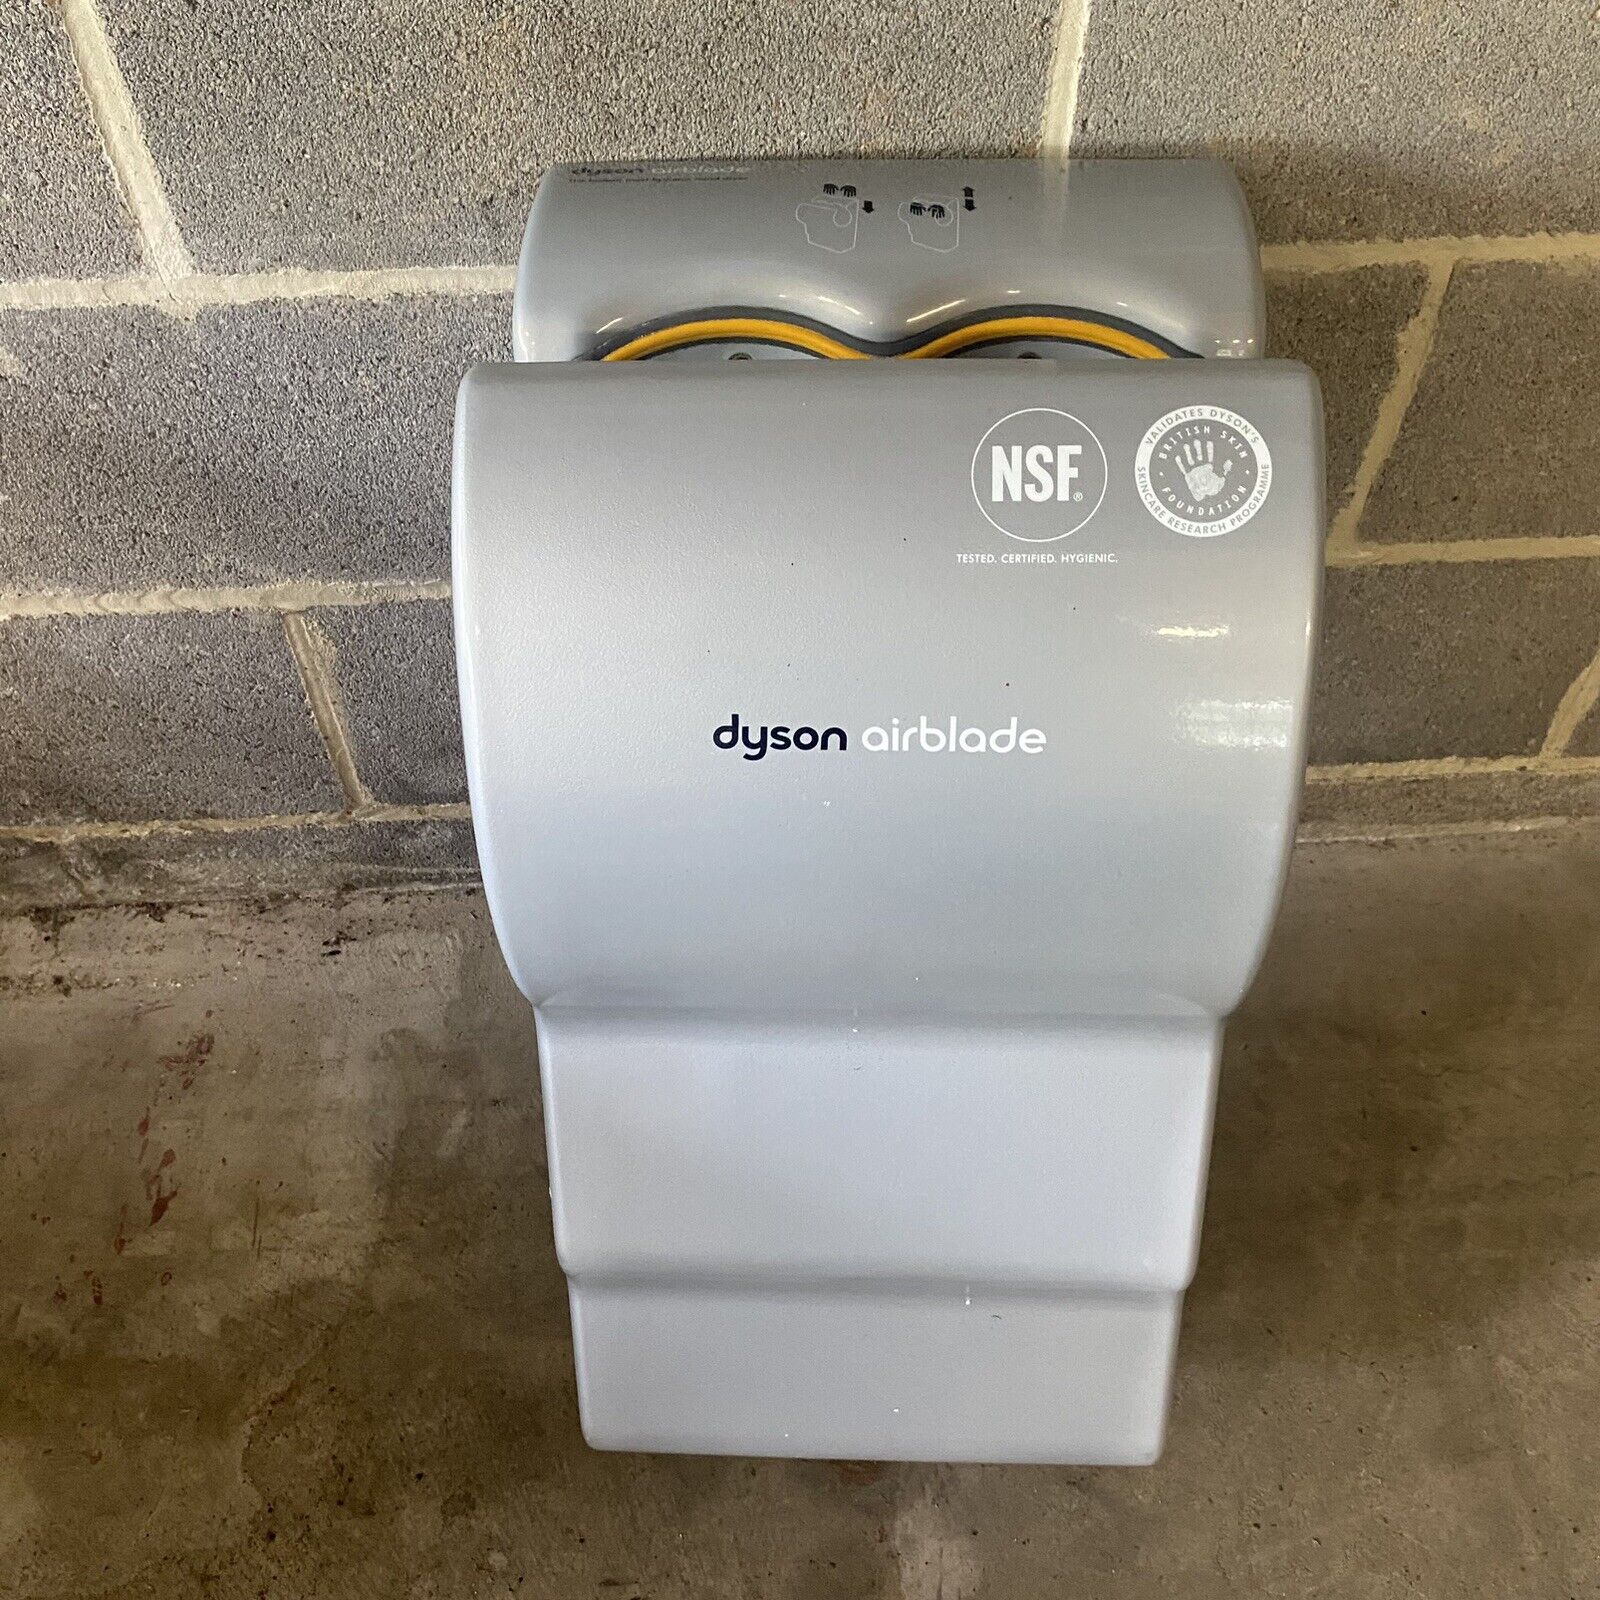 Dyson AB-14 Airblade Automatic Hand Dryer 200-240V Grey Untested In Box W Manual